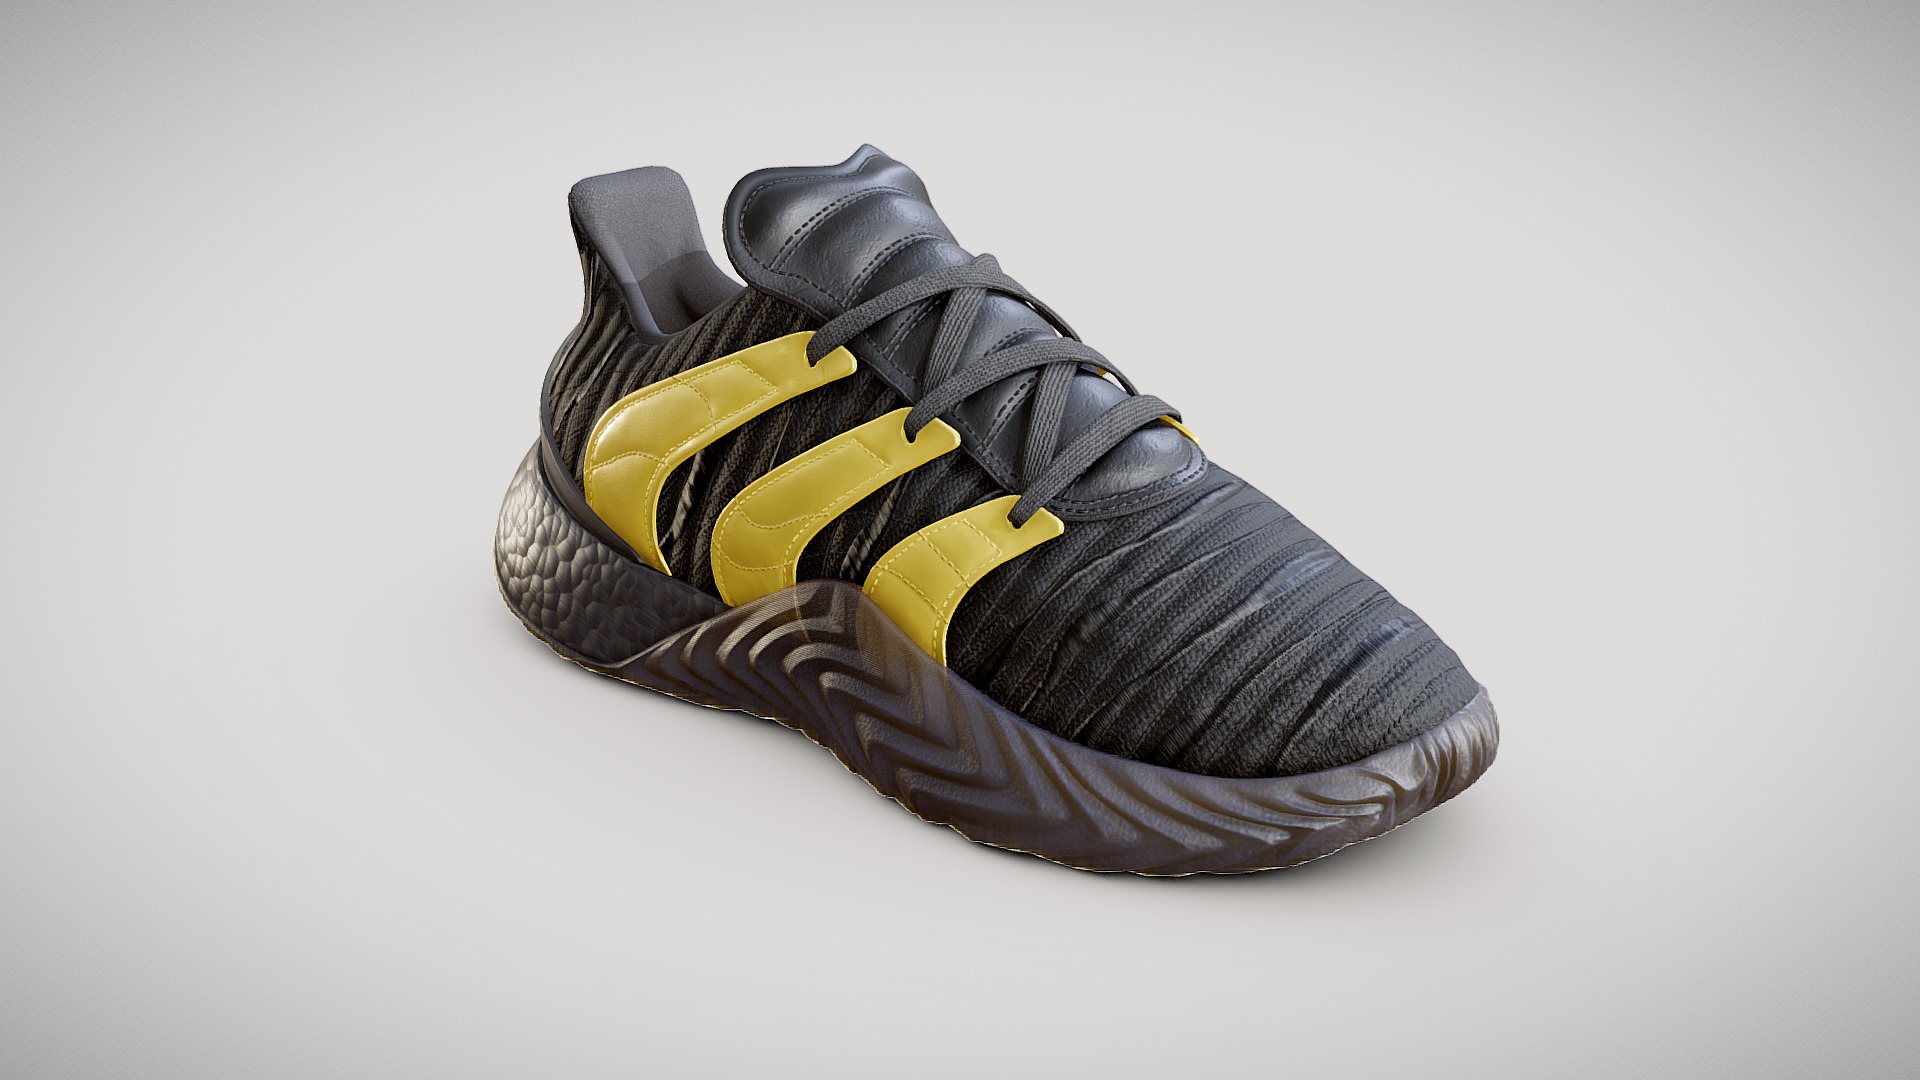 3D model Adidas Sobakov 2.0 Originals black - This is a 3D model of the Adidas Sobakov 2.0 Originals black. The 3D model is about a black and yellow shoe.